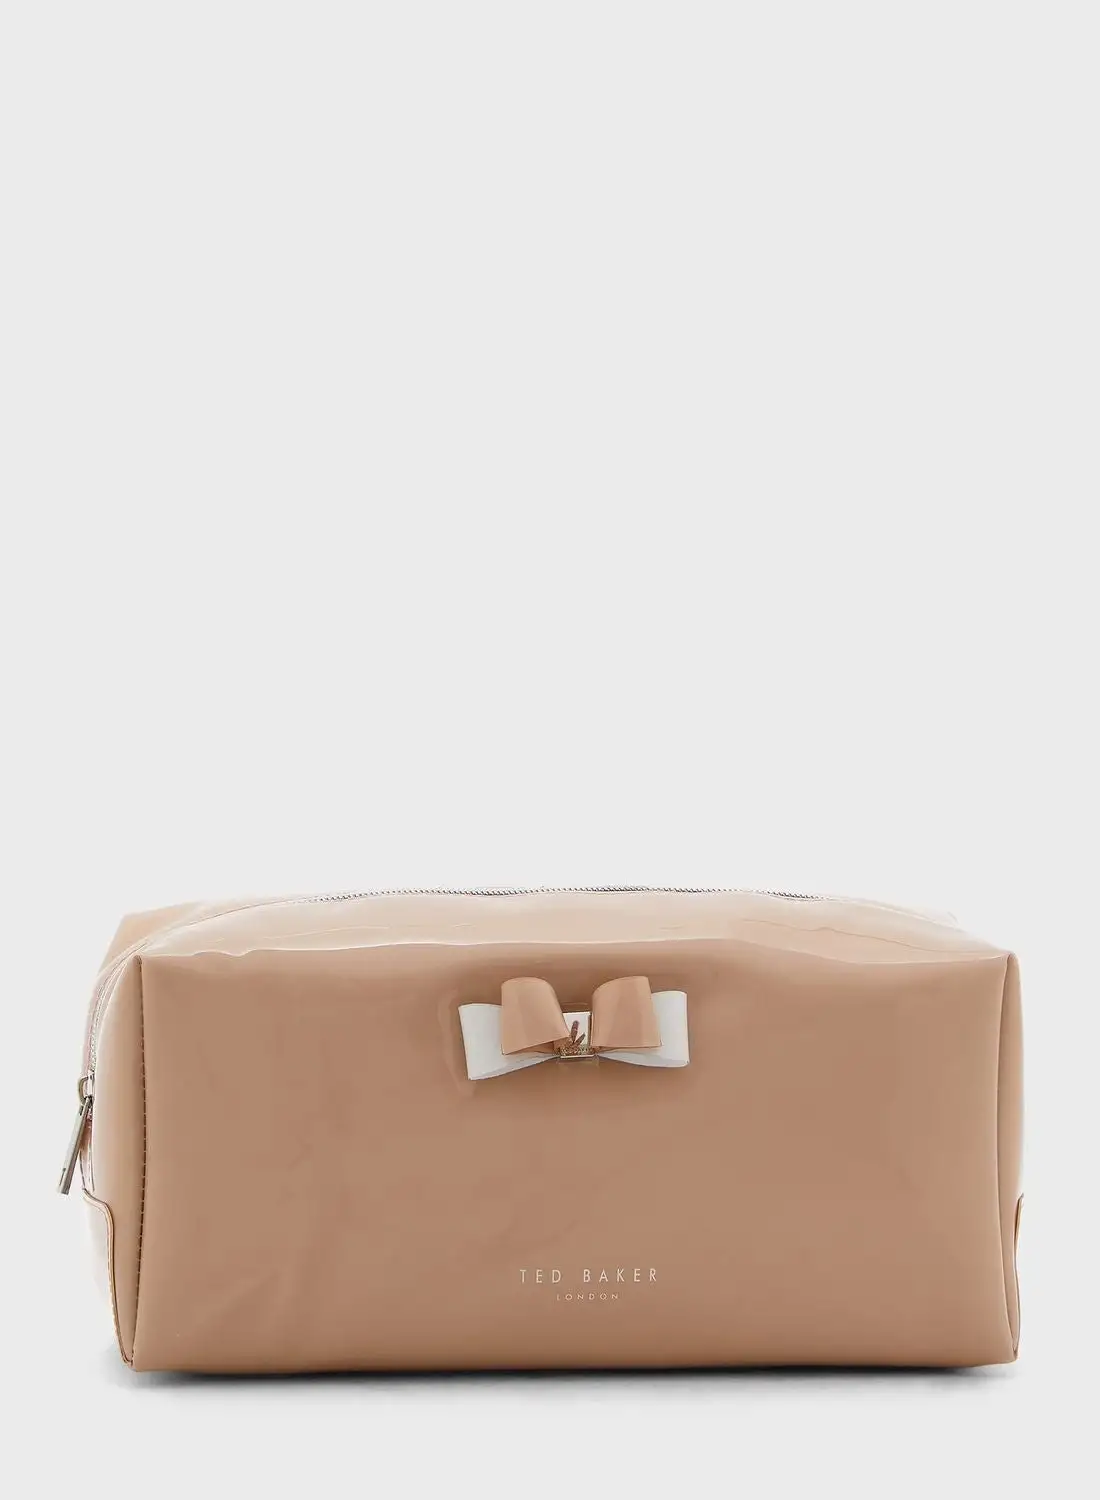 Ted Baker Casual Cosmetic Bag